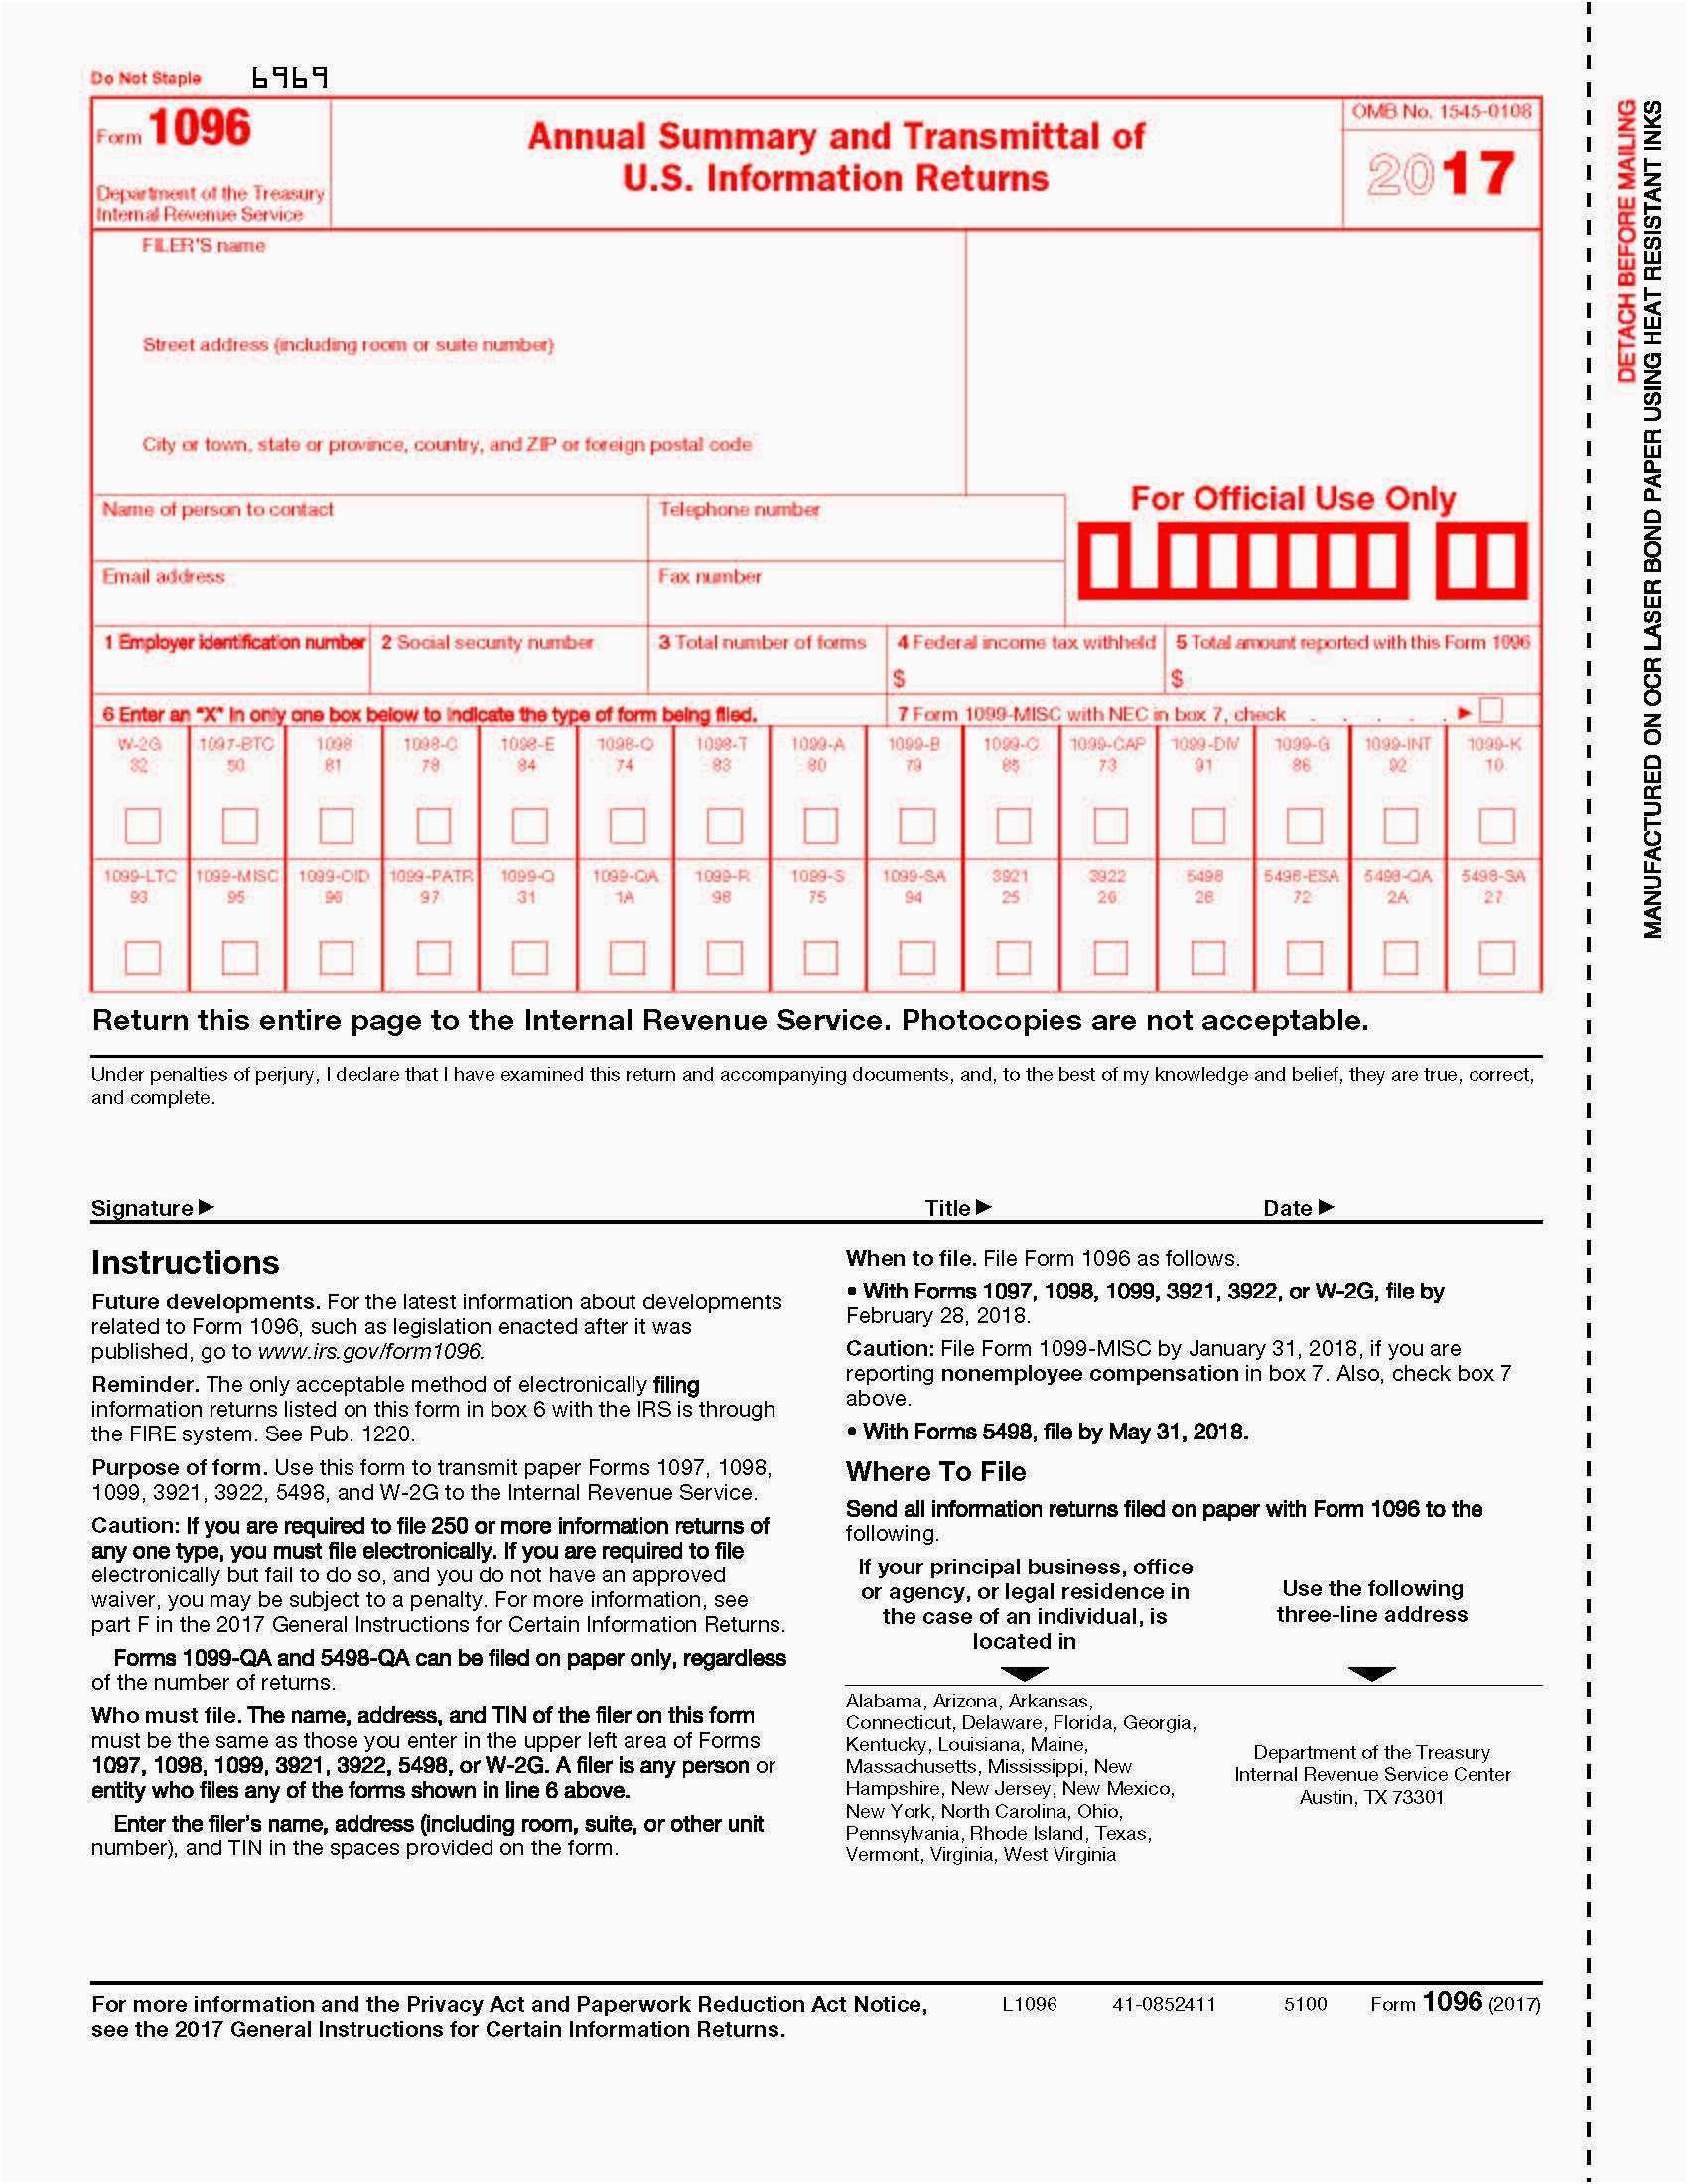 1099 Misc Form 2013 Template Canredatanetco #46690500034 – 1099 Form - Free Printable 1099 Misc Form 2013